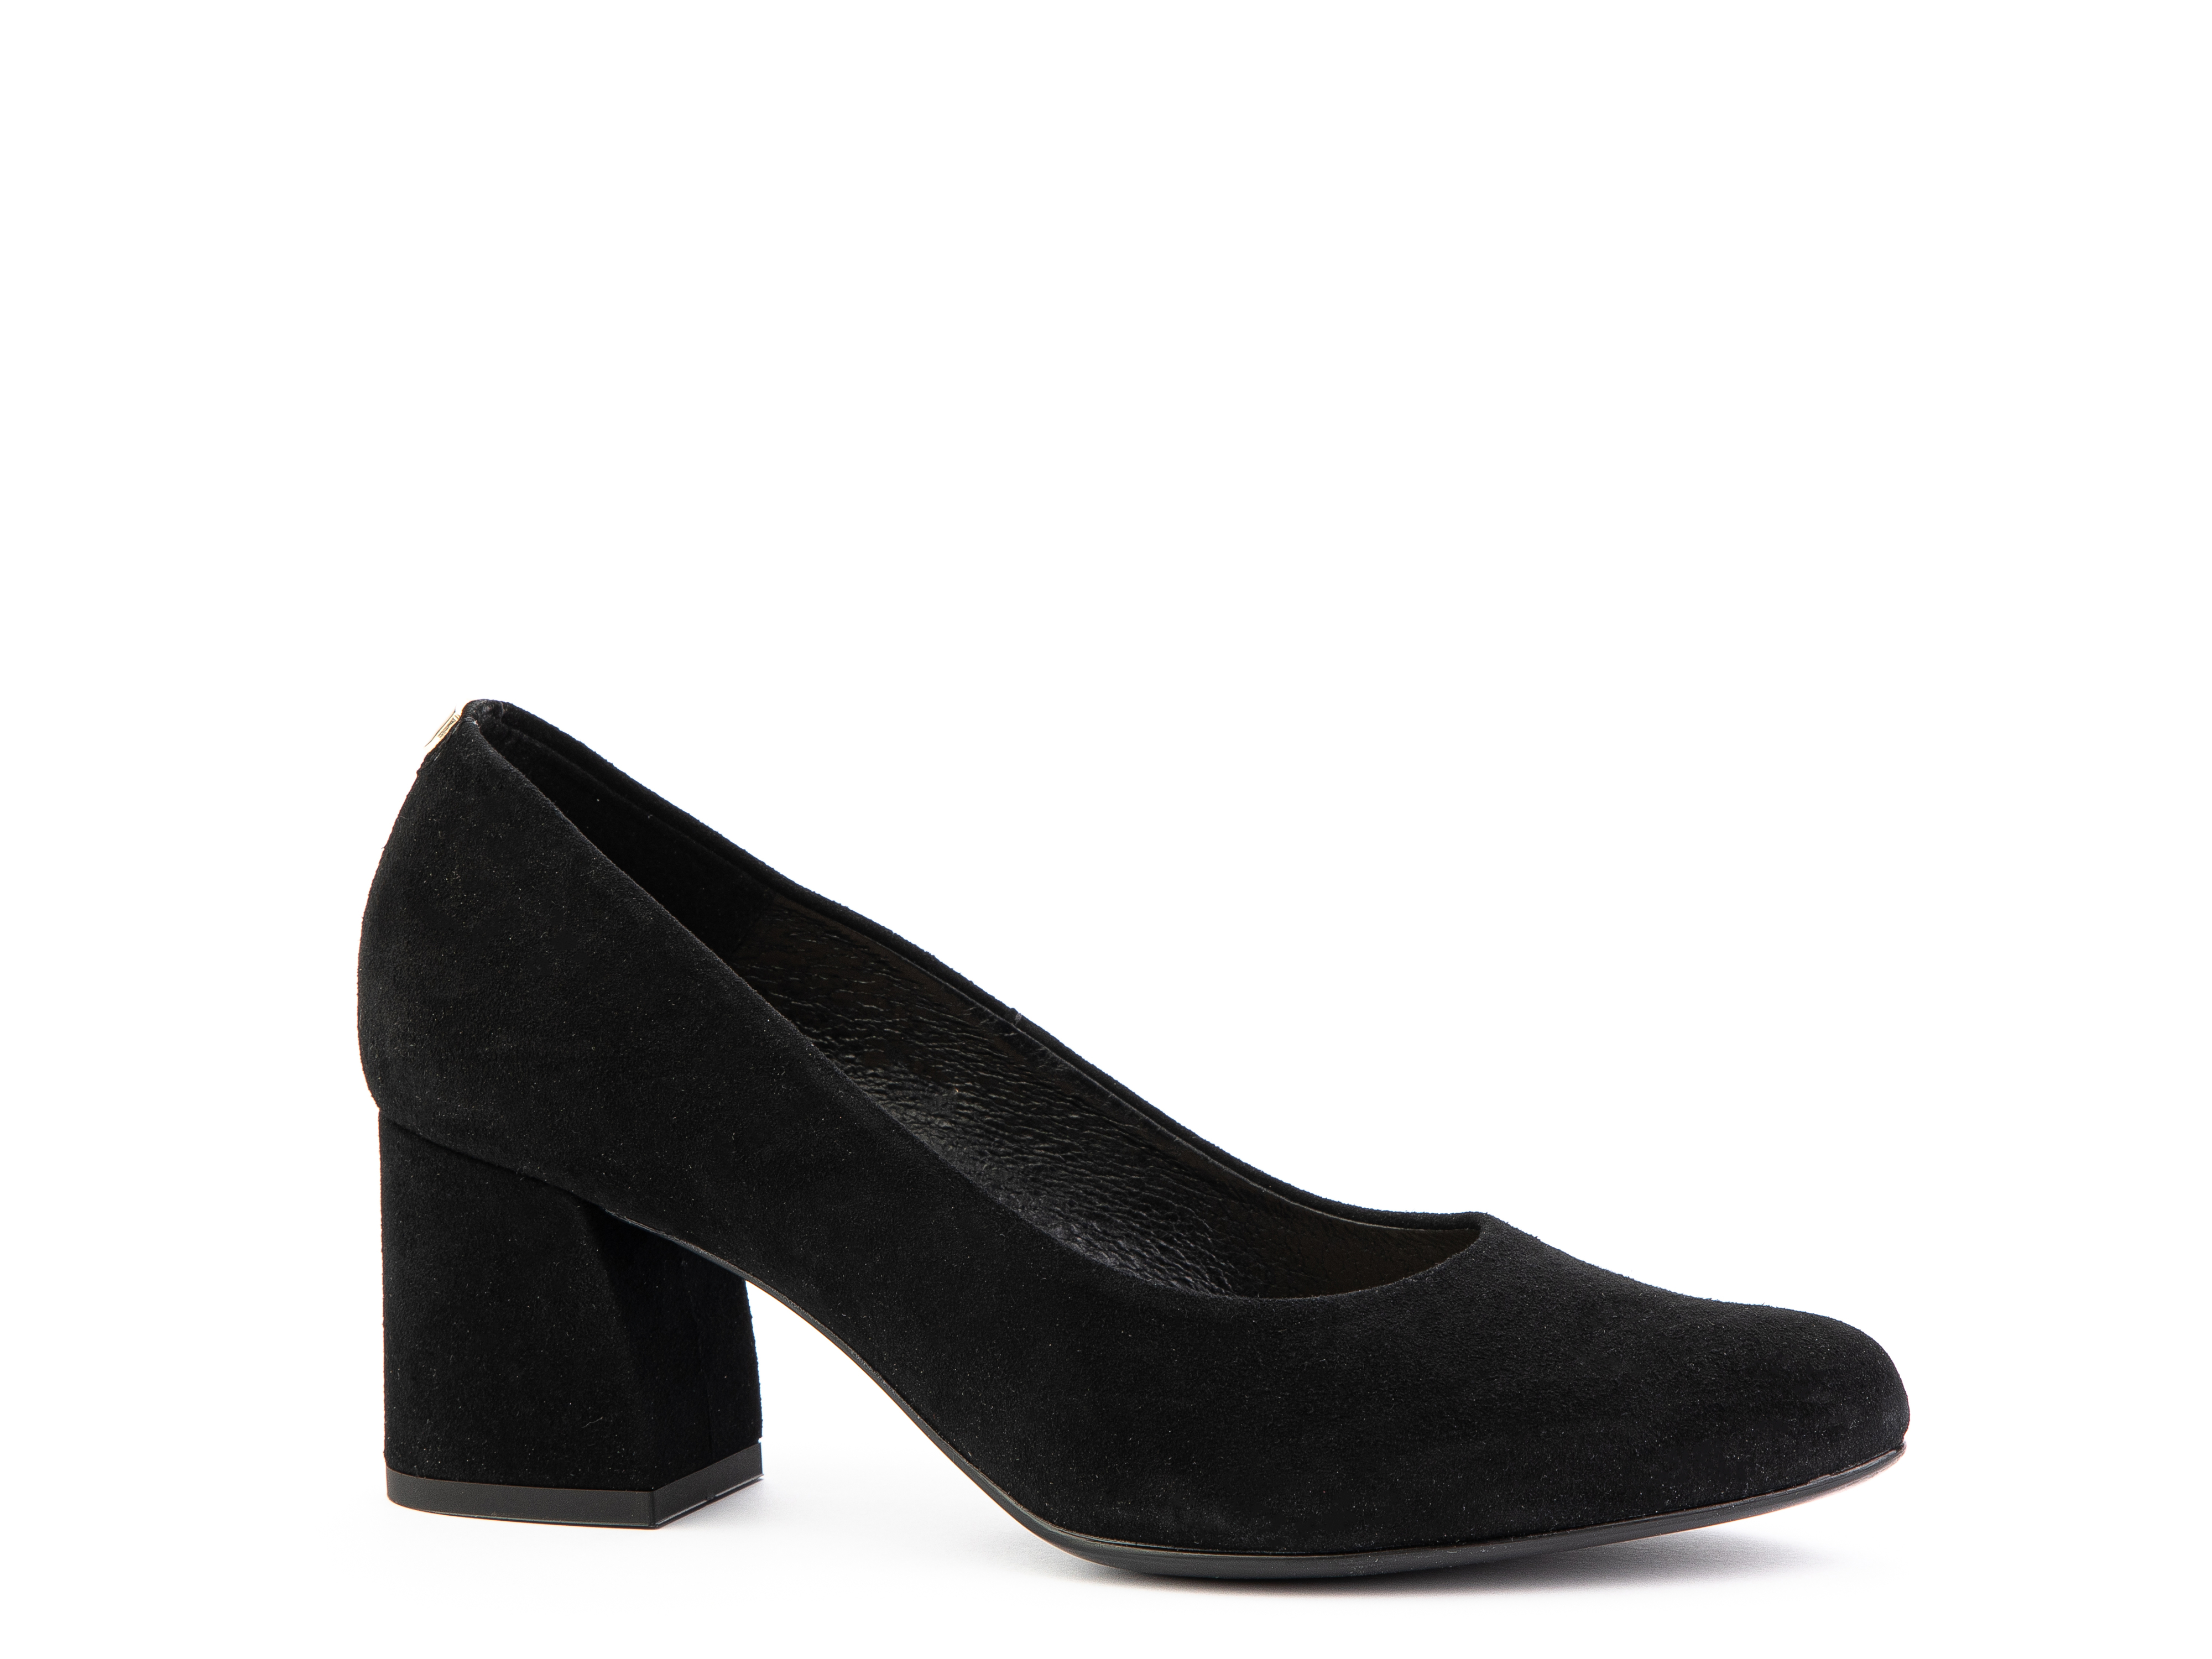 A black closed toe shoe with a short, chunky heel